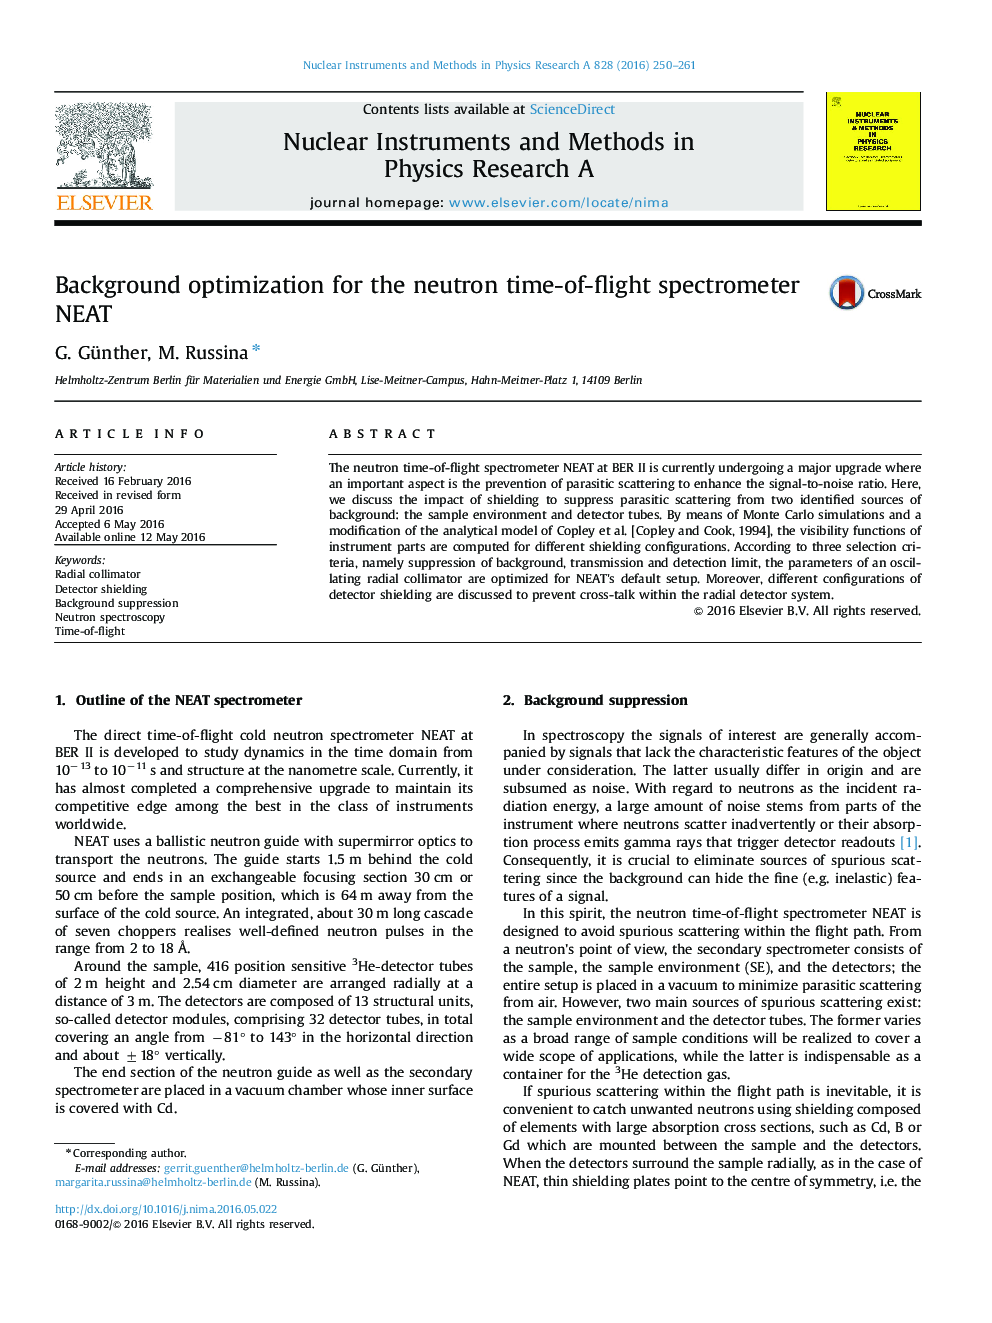 Background optimization for the neutron time-of-flight spectrometer NEAT